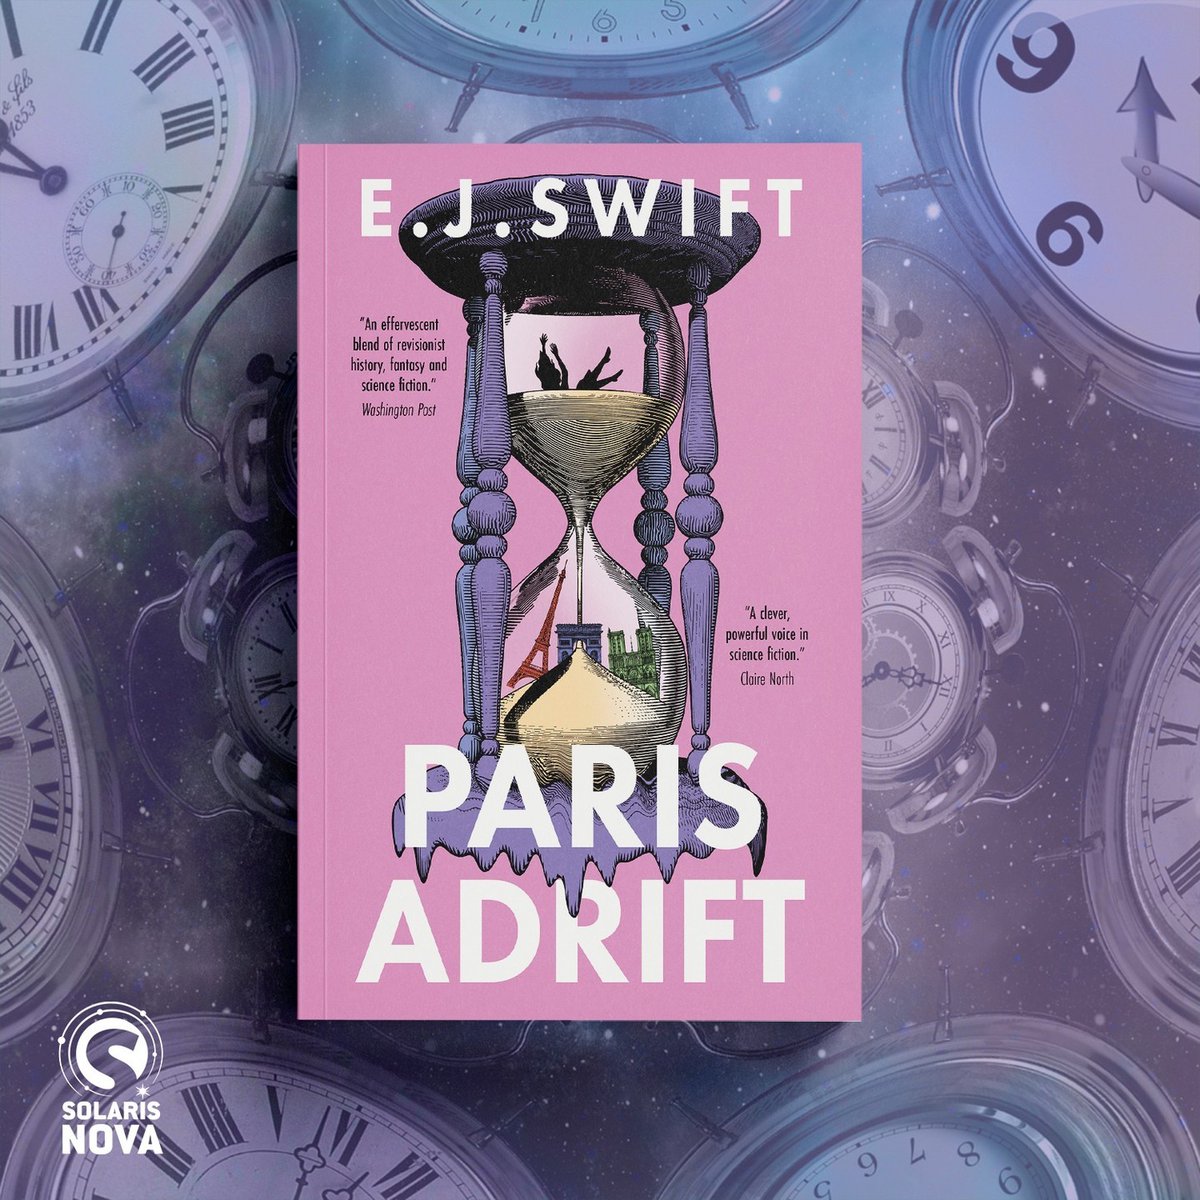 ⌛ Available now: our second Solaris Nova title, PARIS ADRIFT by E. J. Swift (@Catamaroon)! Hallie moves to Paris to reinvent herself, find a new life, and maybe a new love. Then, it gets weird. Grab it now - only £2.99 in ebook! geni.us/ParisAdrift